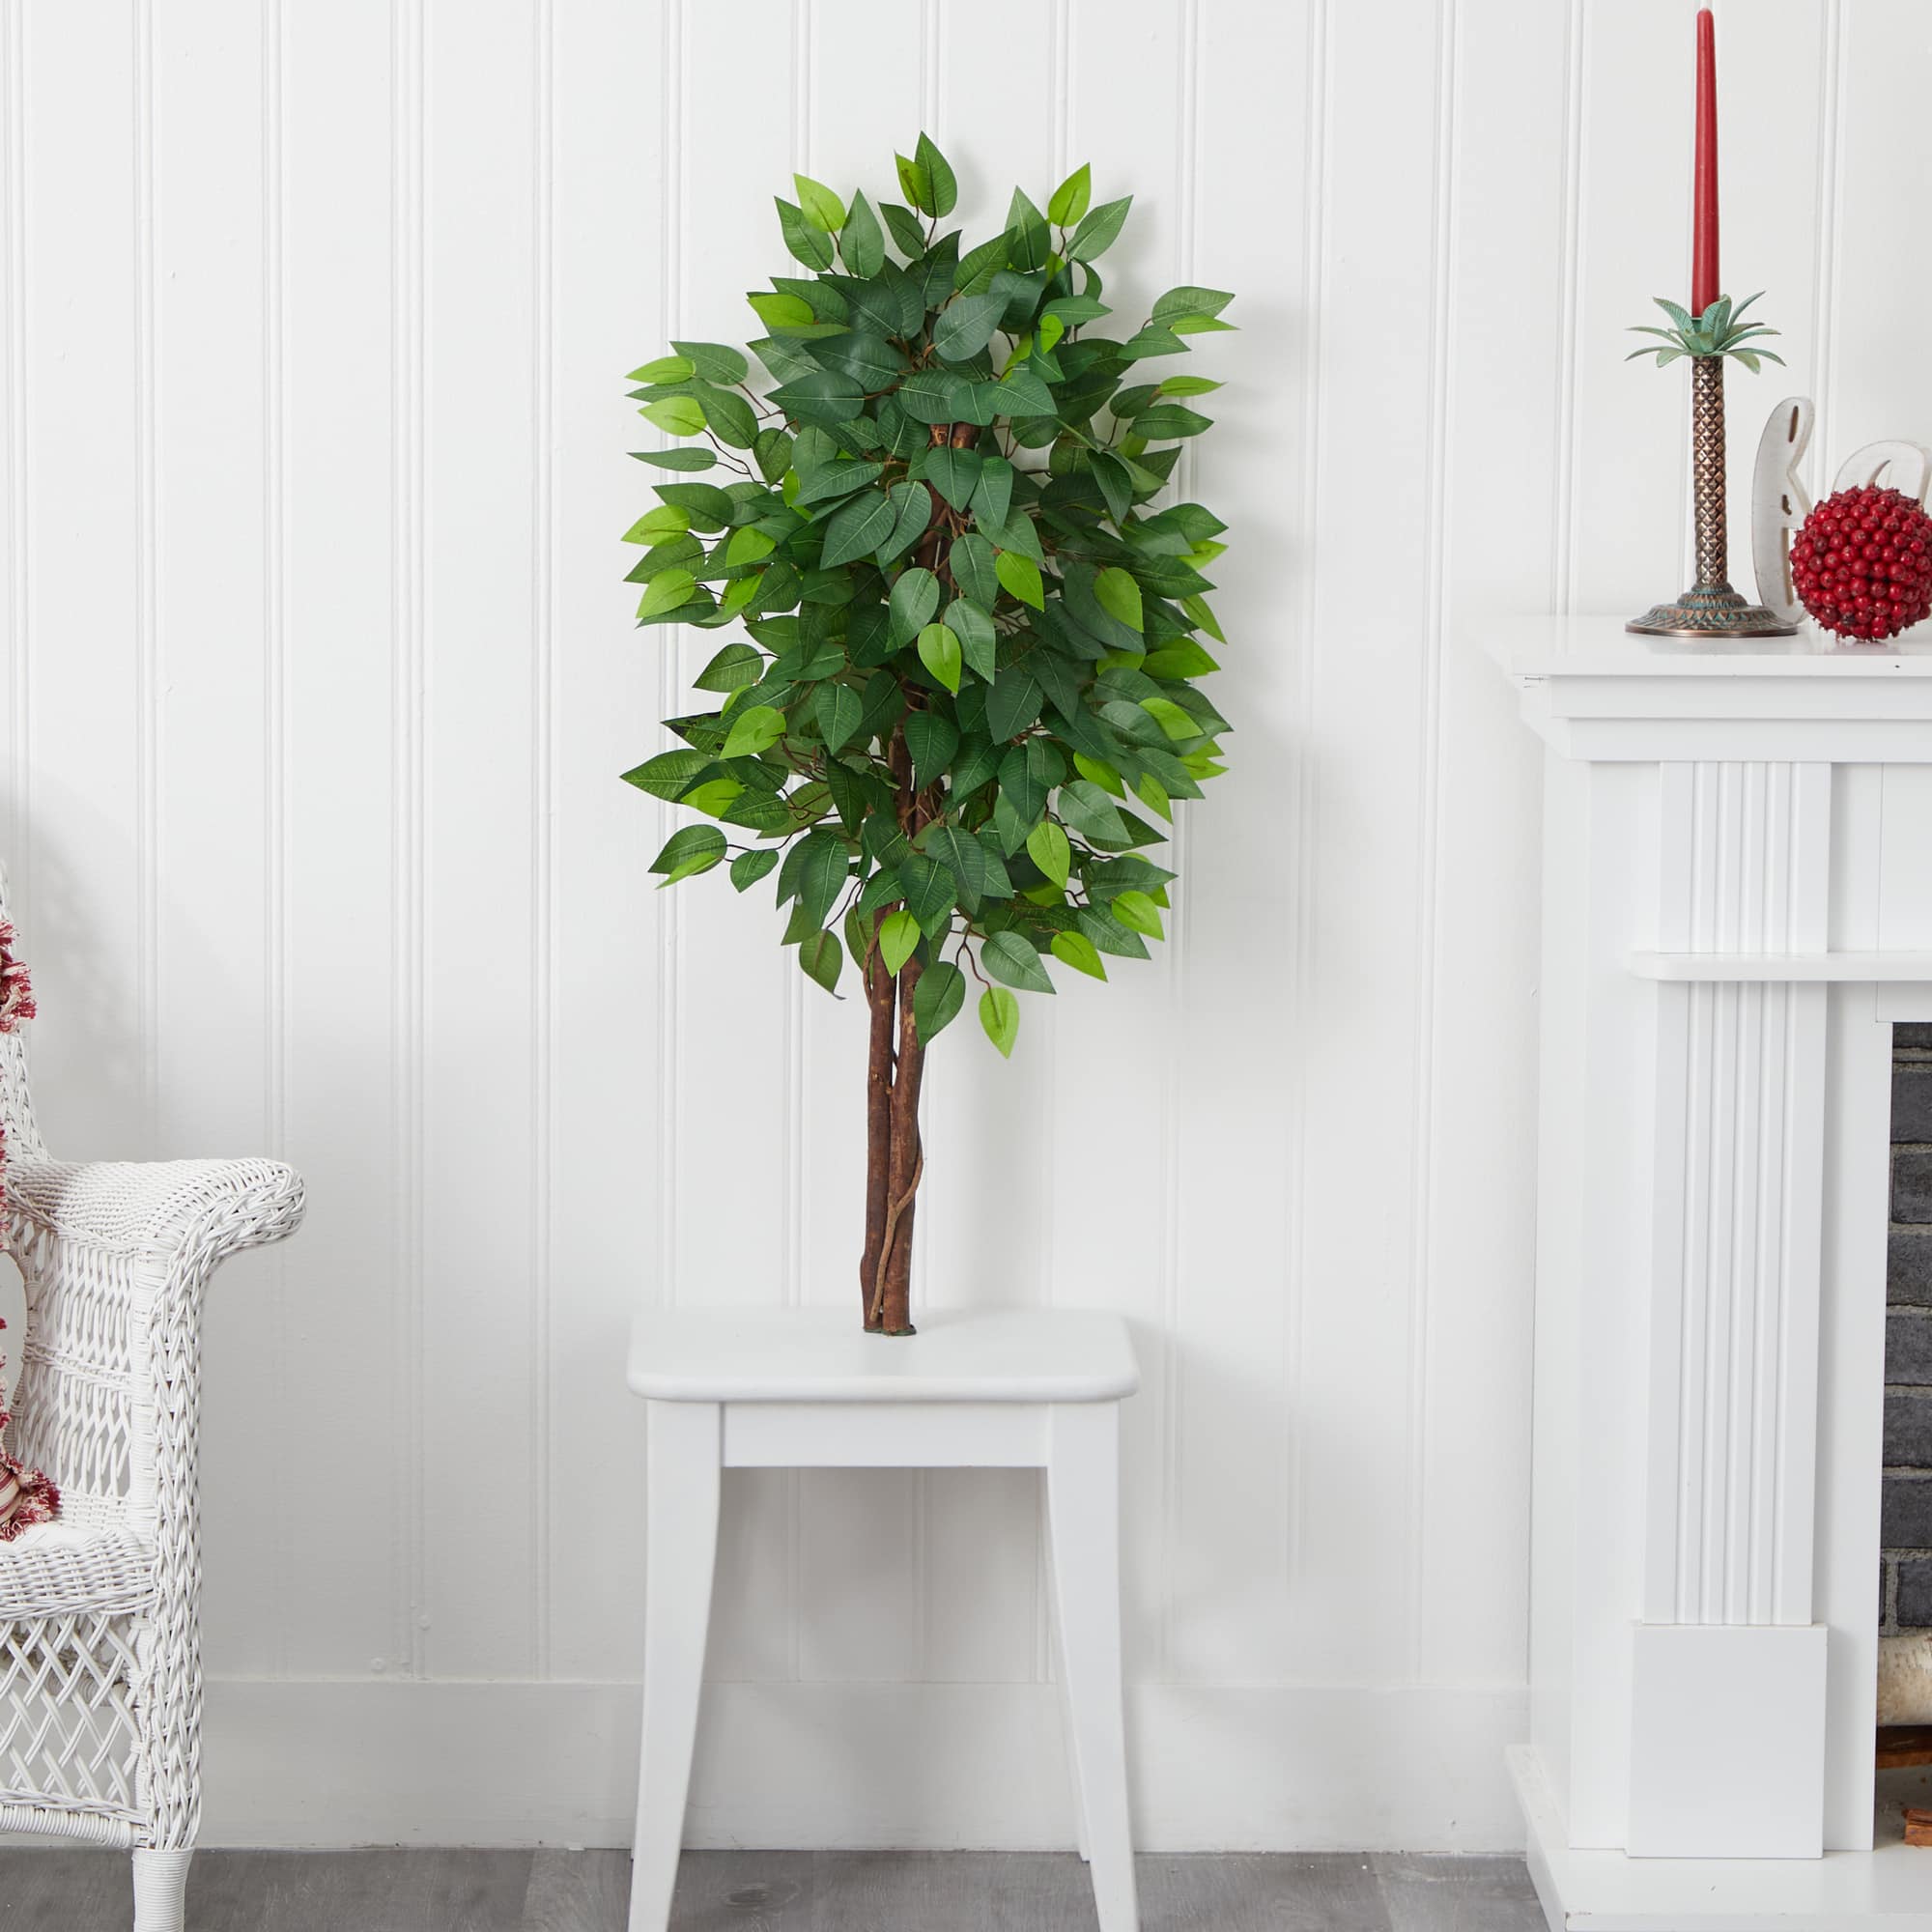 3ft. Artificial Double Trunk Ficus Tree